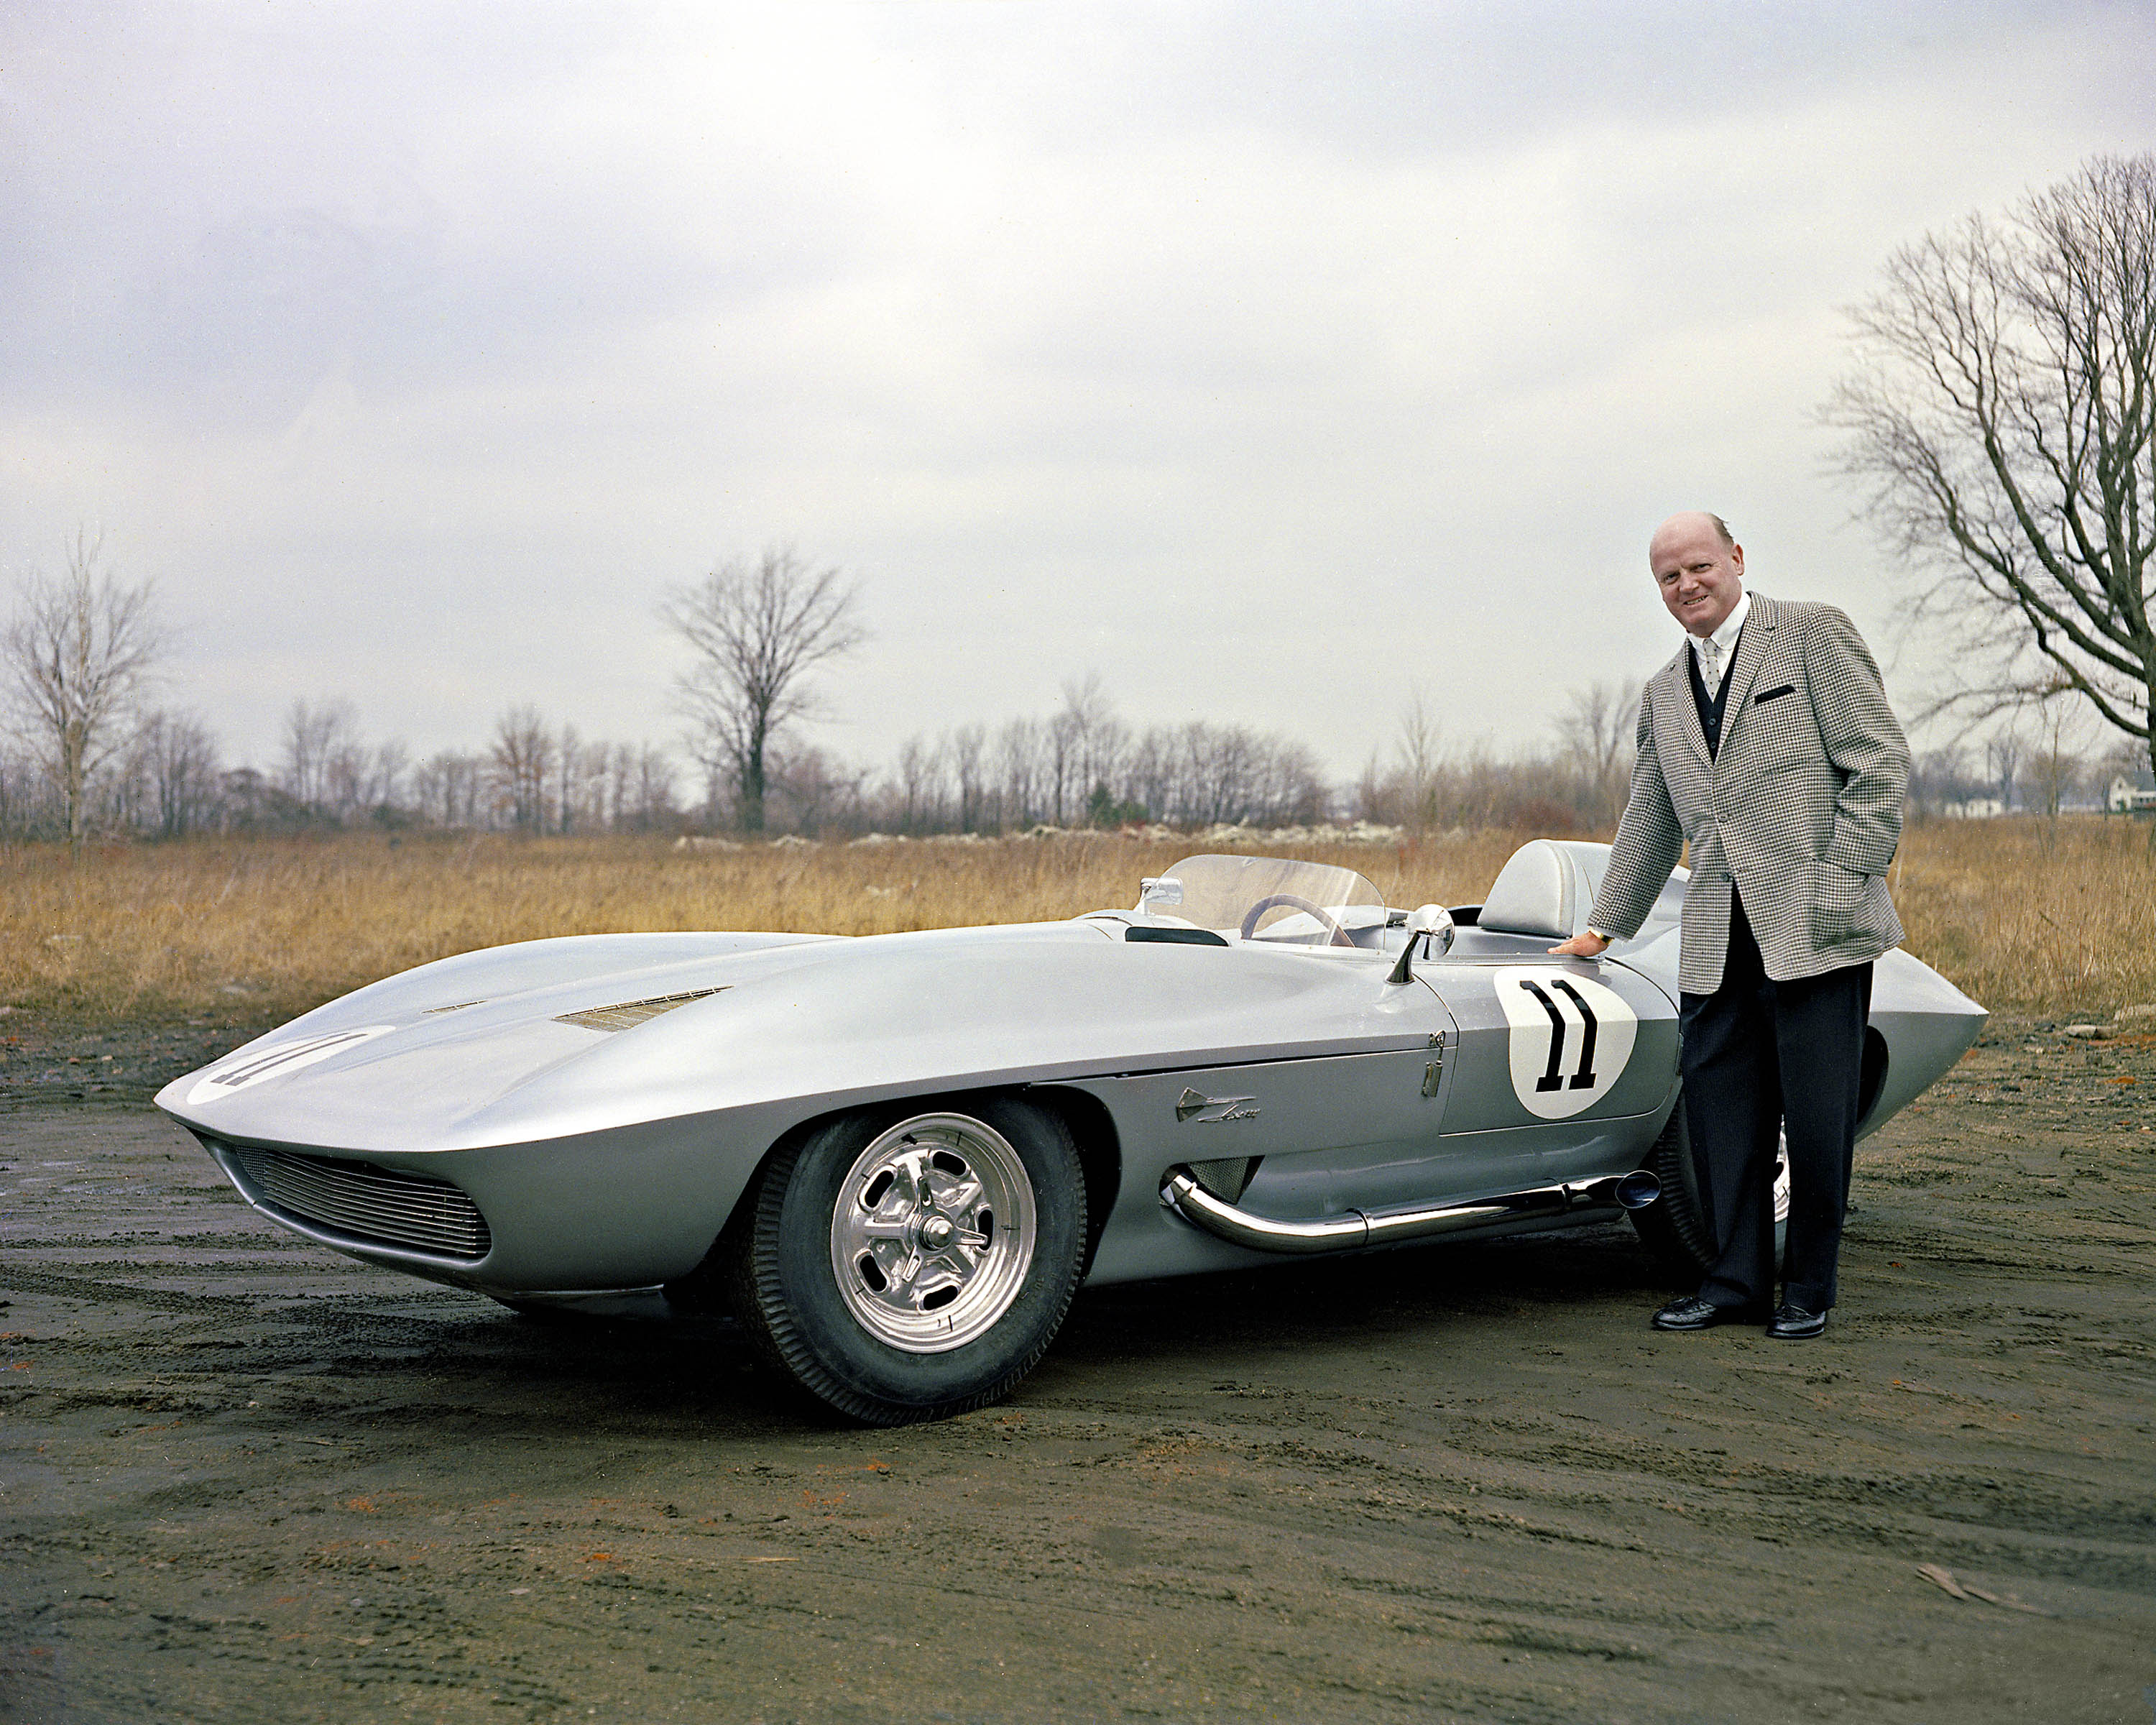 Video: '59 Stingray Racer Concept at GM Heritage Center